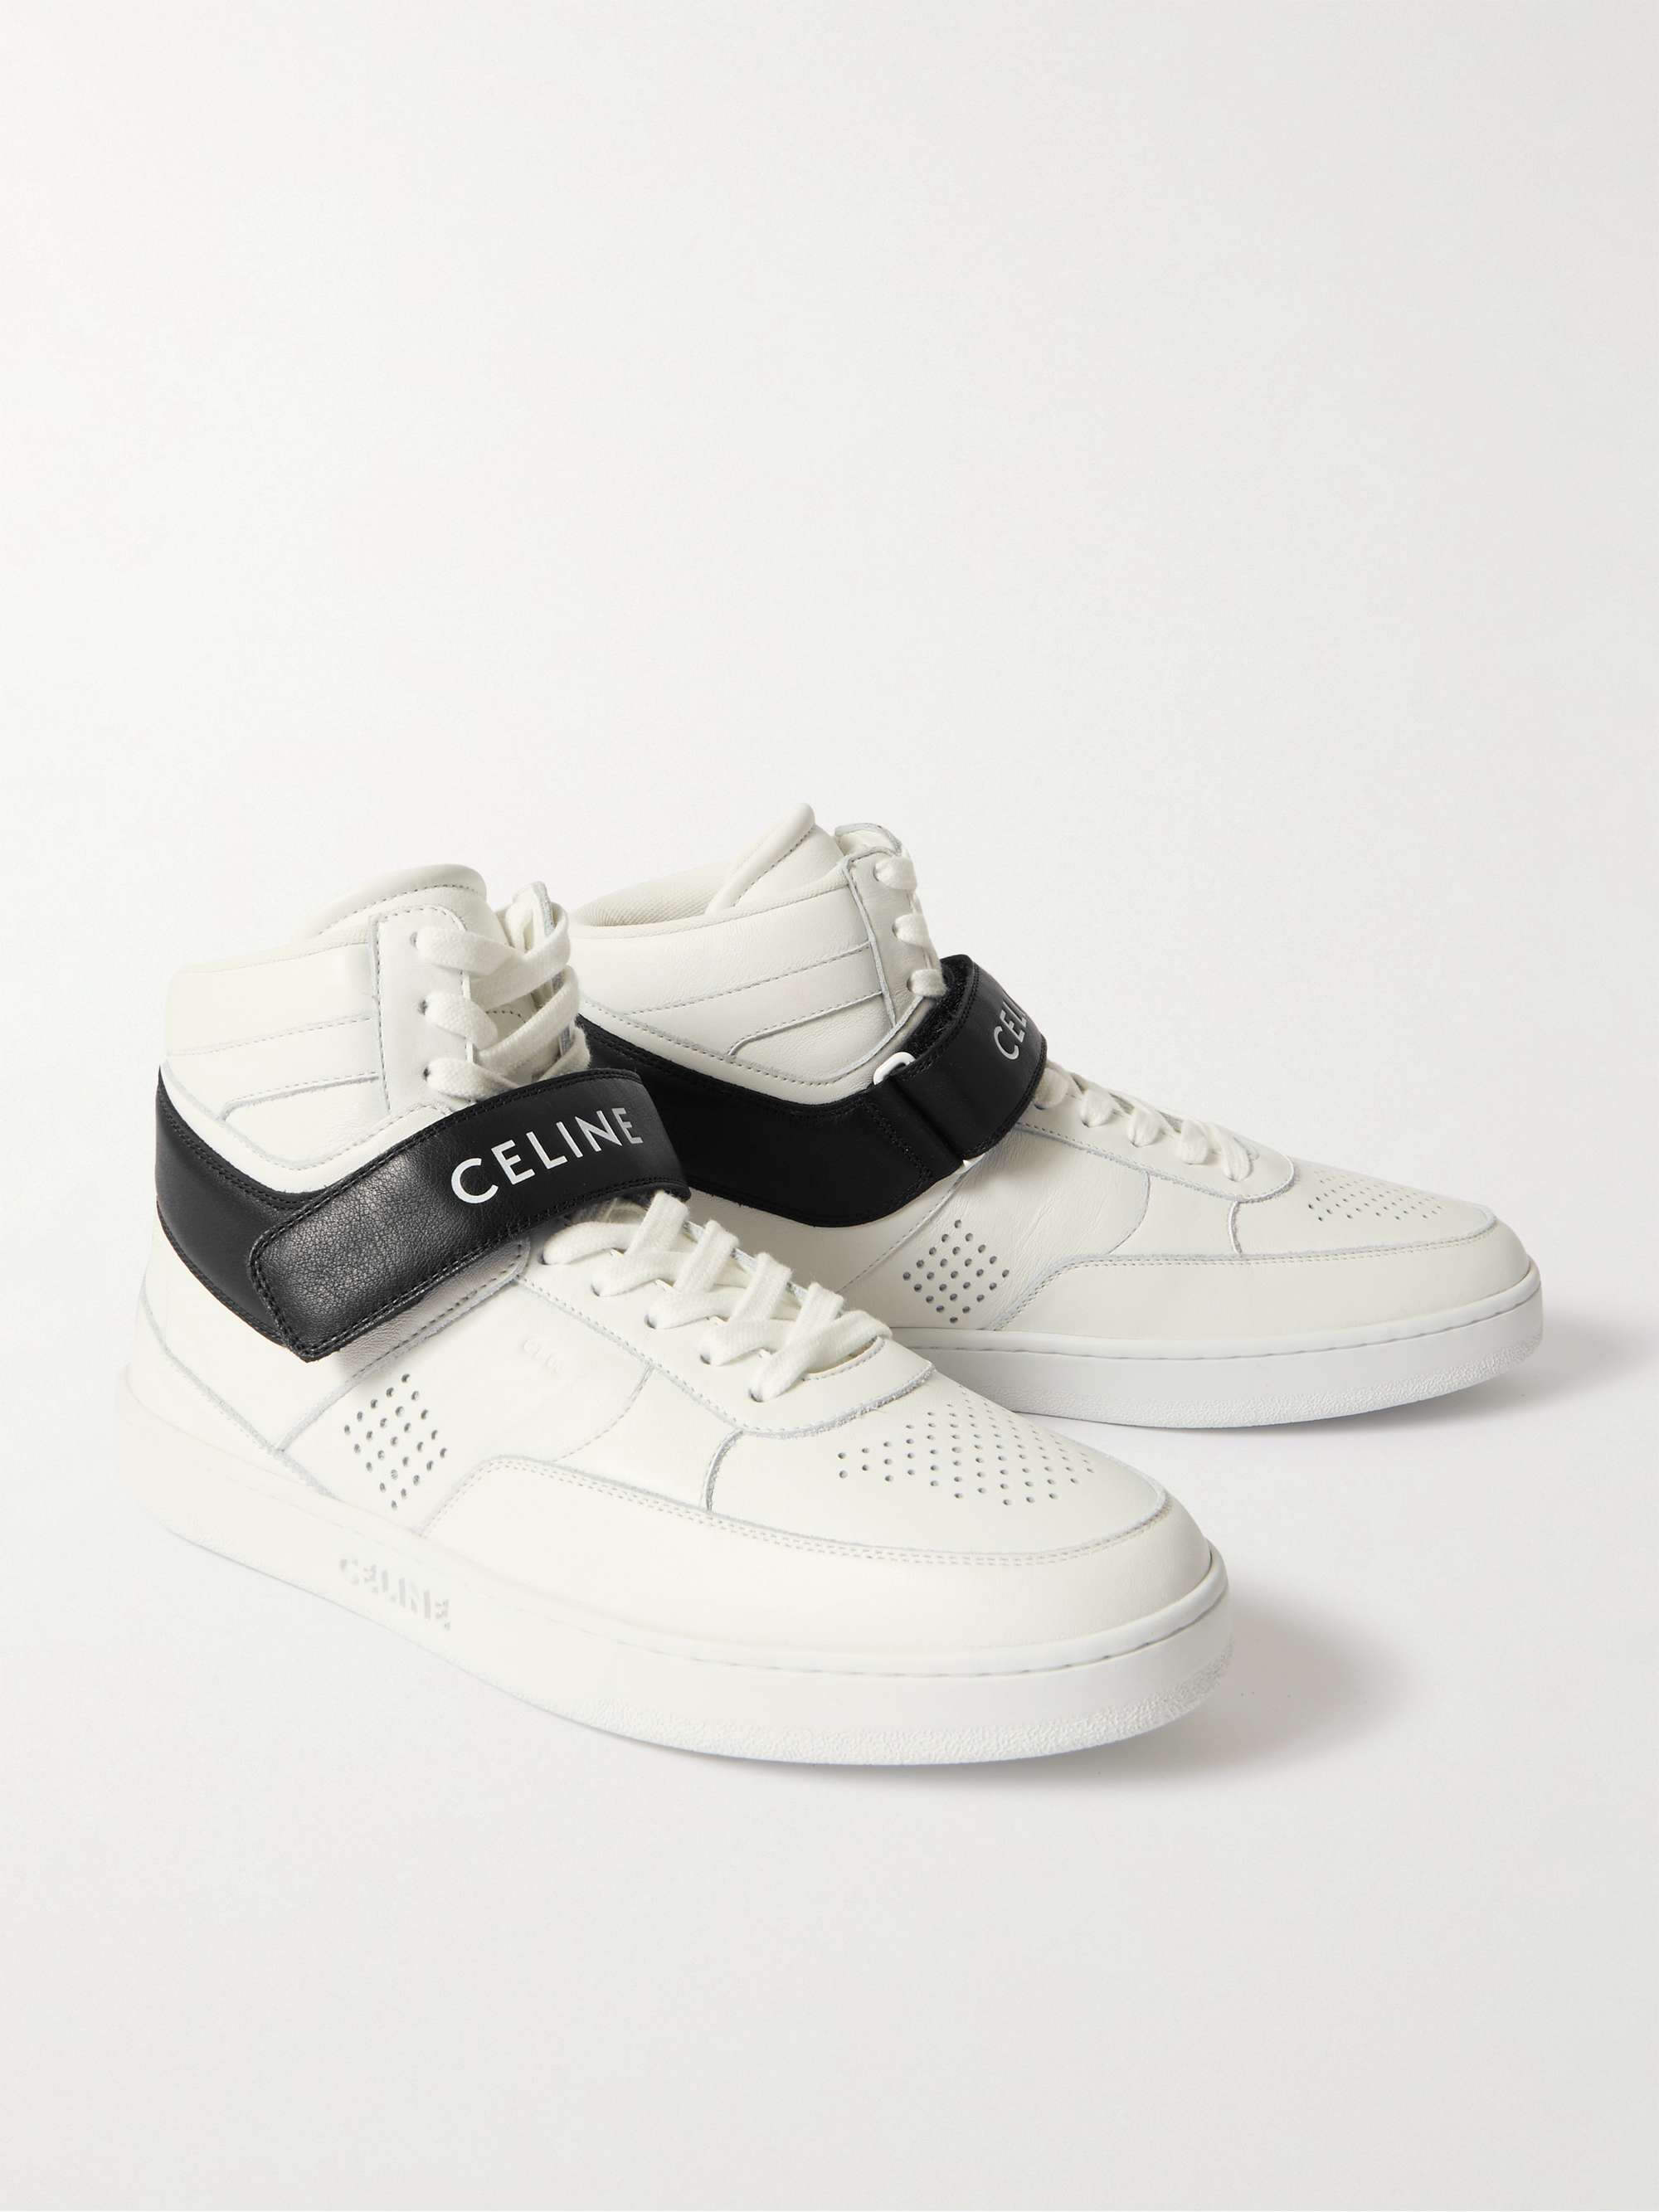 CELINE HOMME Ct-03 Leather High-Top Sneakers